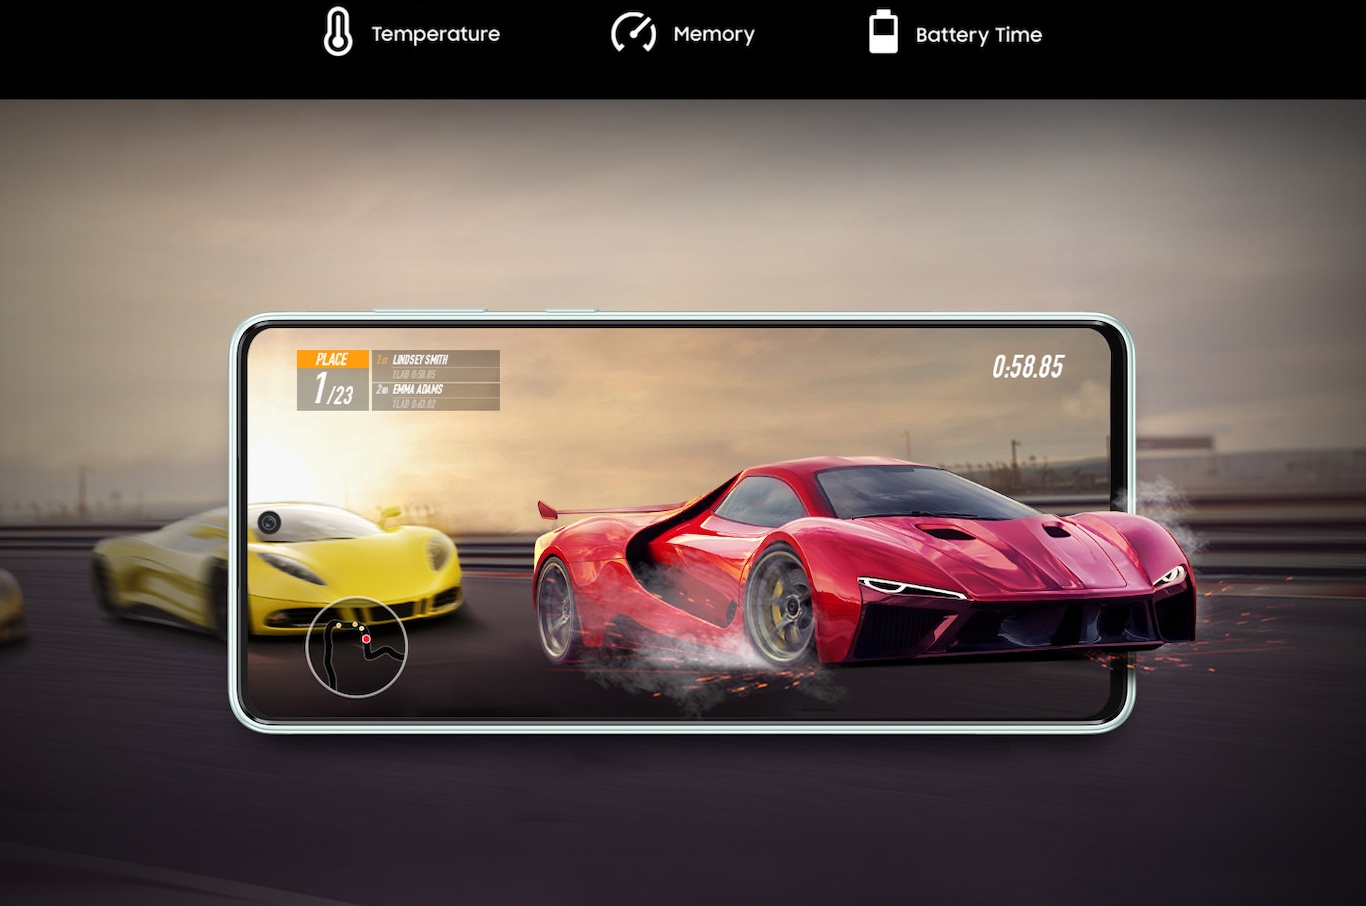 Enjoy uninterrupted gaming on Samsung Galaxy A73 5G with Game Booster. The scene from a car racing game, showing a racetrack with a yellow car racing. On the screen is a racing red car, driving out of the boundaries of the screen. Above, texts read Temperature, Memory and Battery Time.